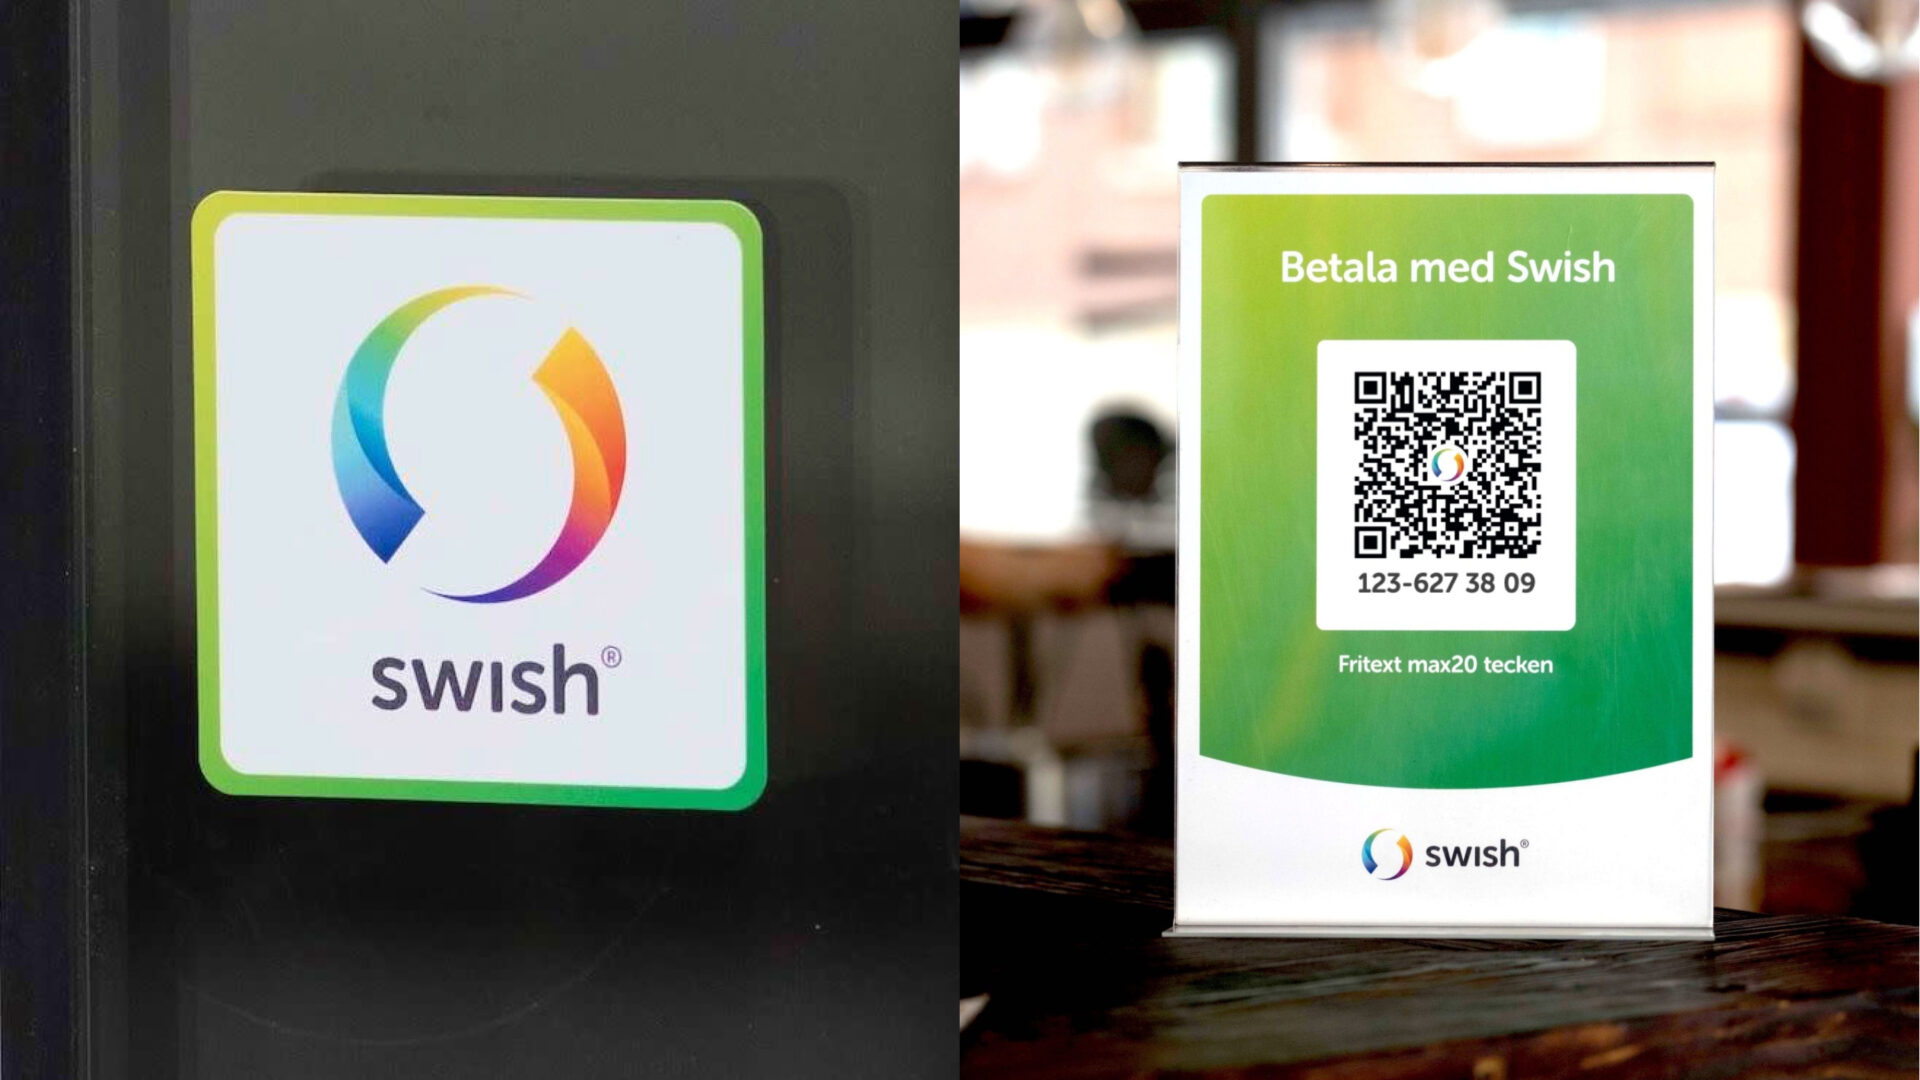 Communicate that you accept Swish in your physical store.
